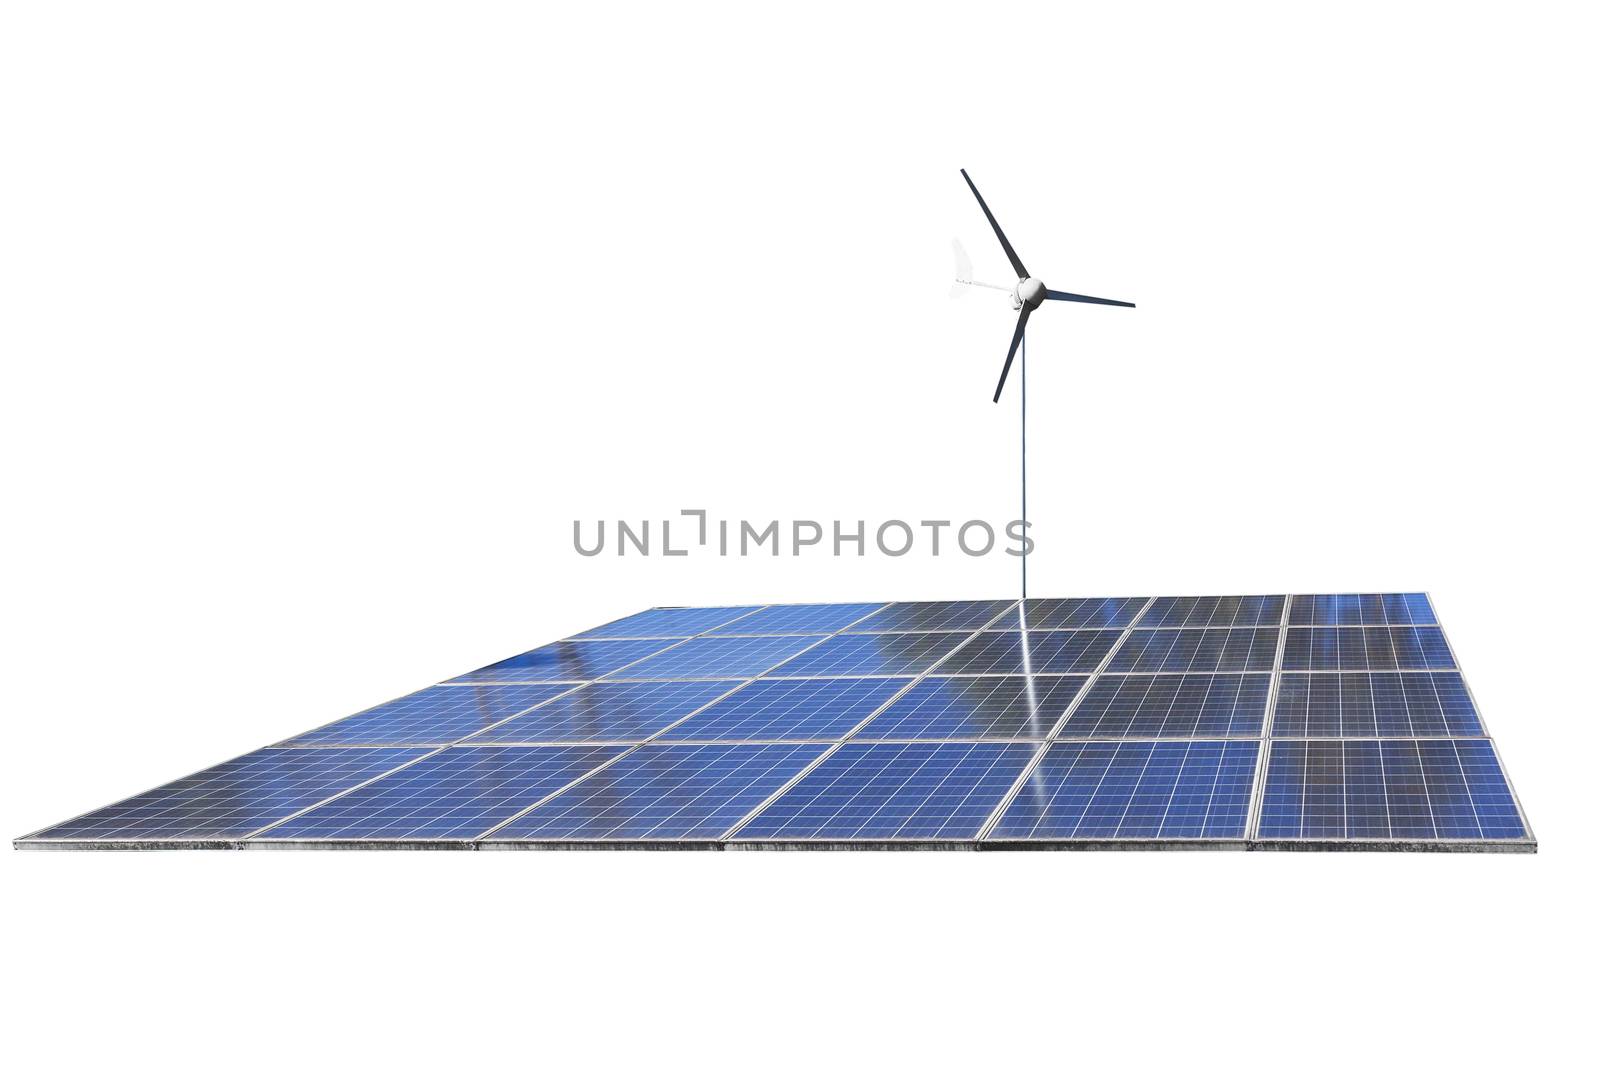 Solar cell Panels and wind turbine, produce power, green energy concept, isolated on white background